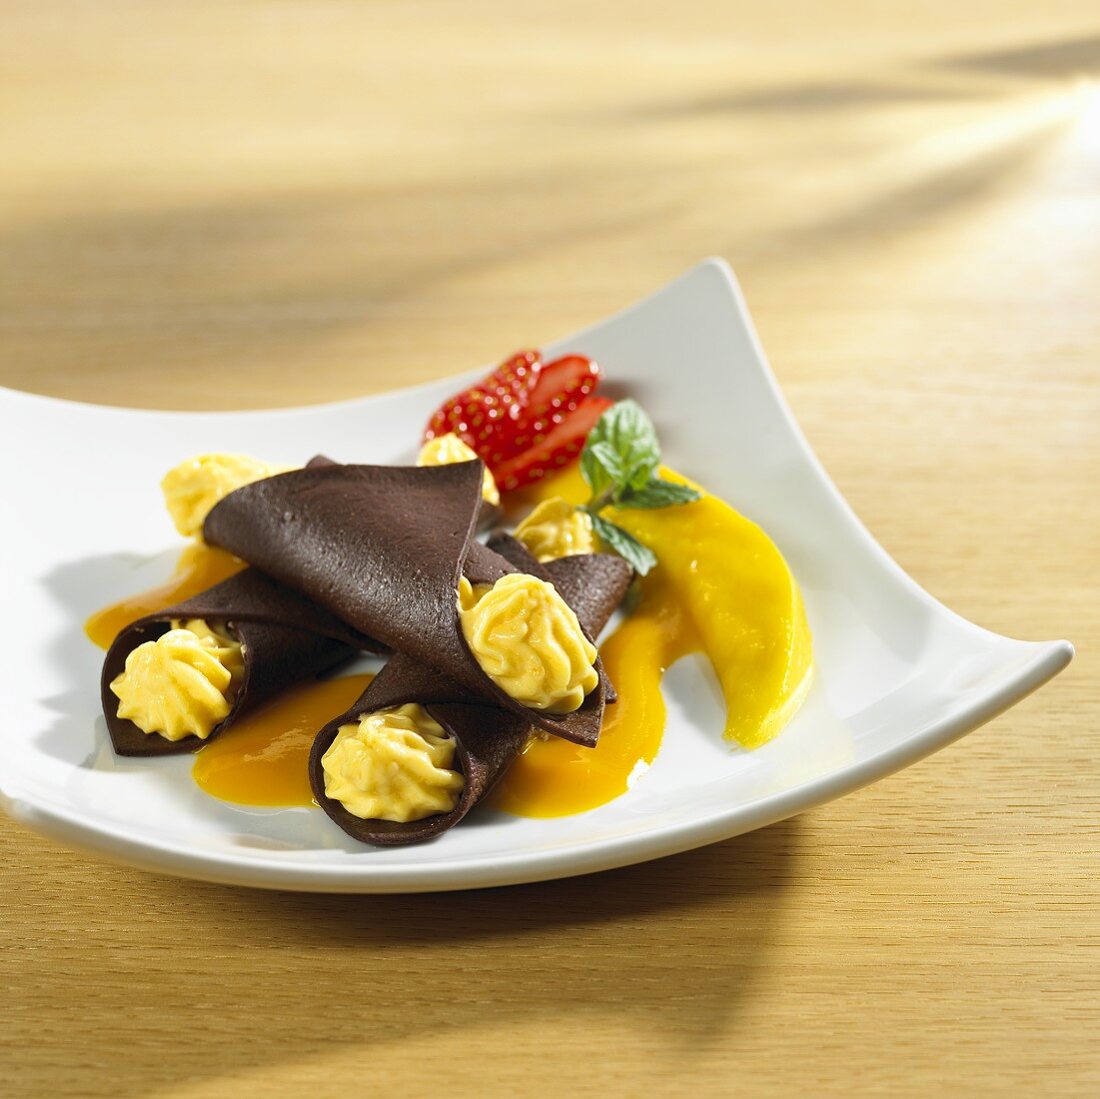 Chocolate cannelloni filled with mango cream